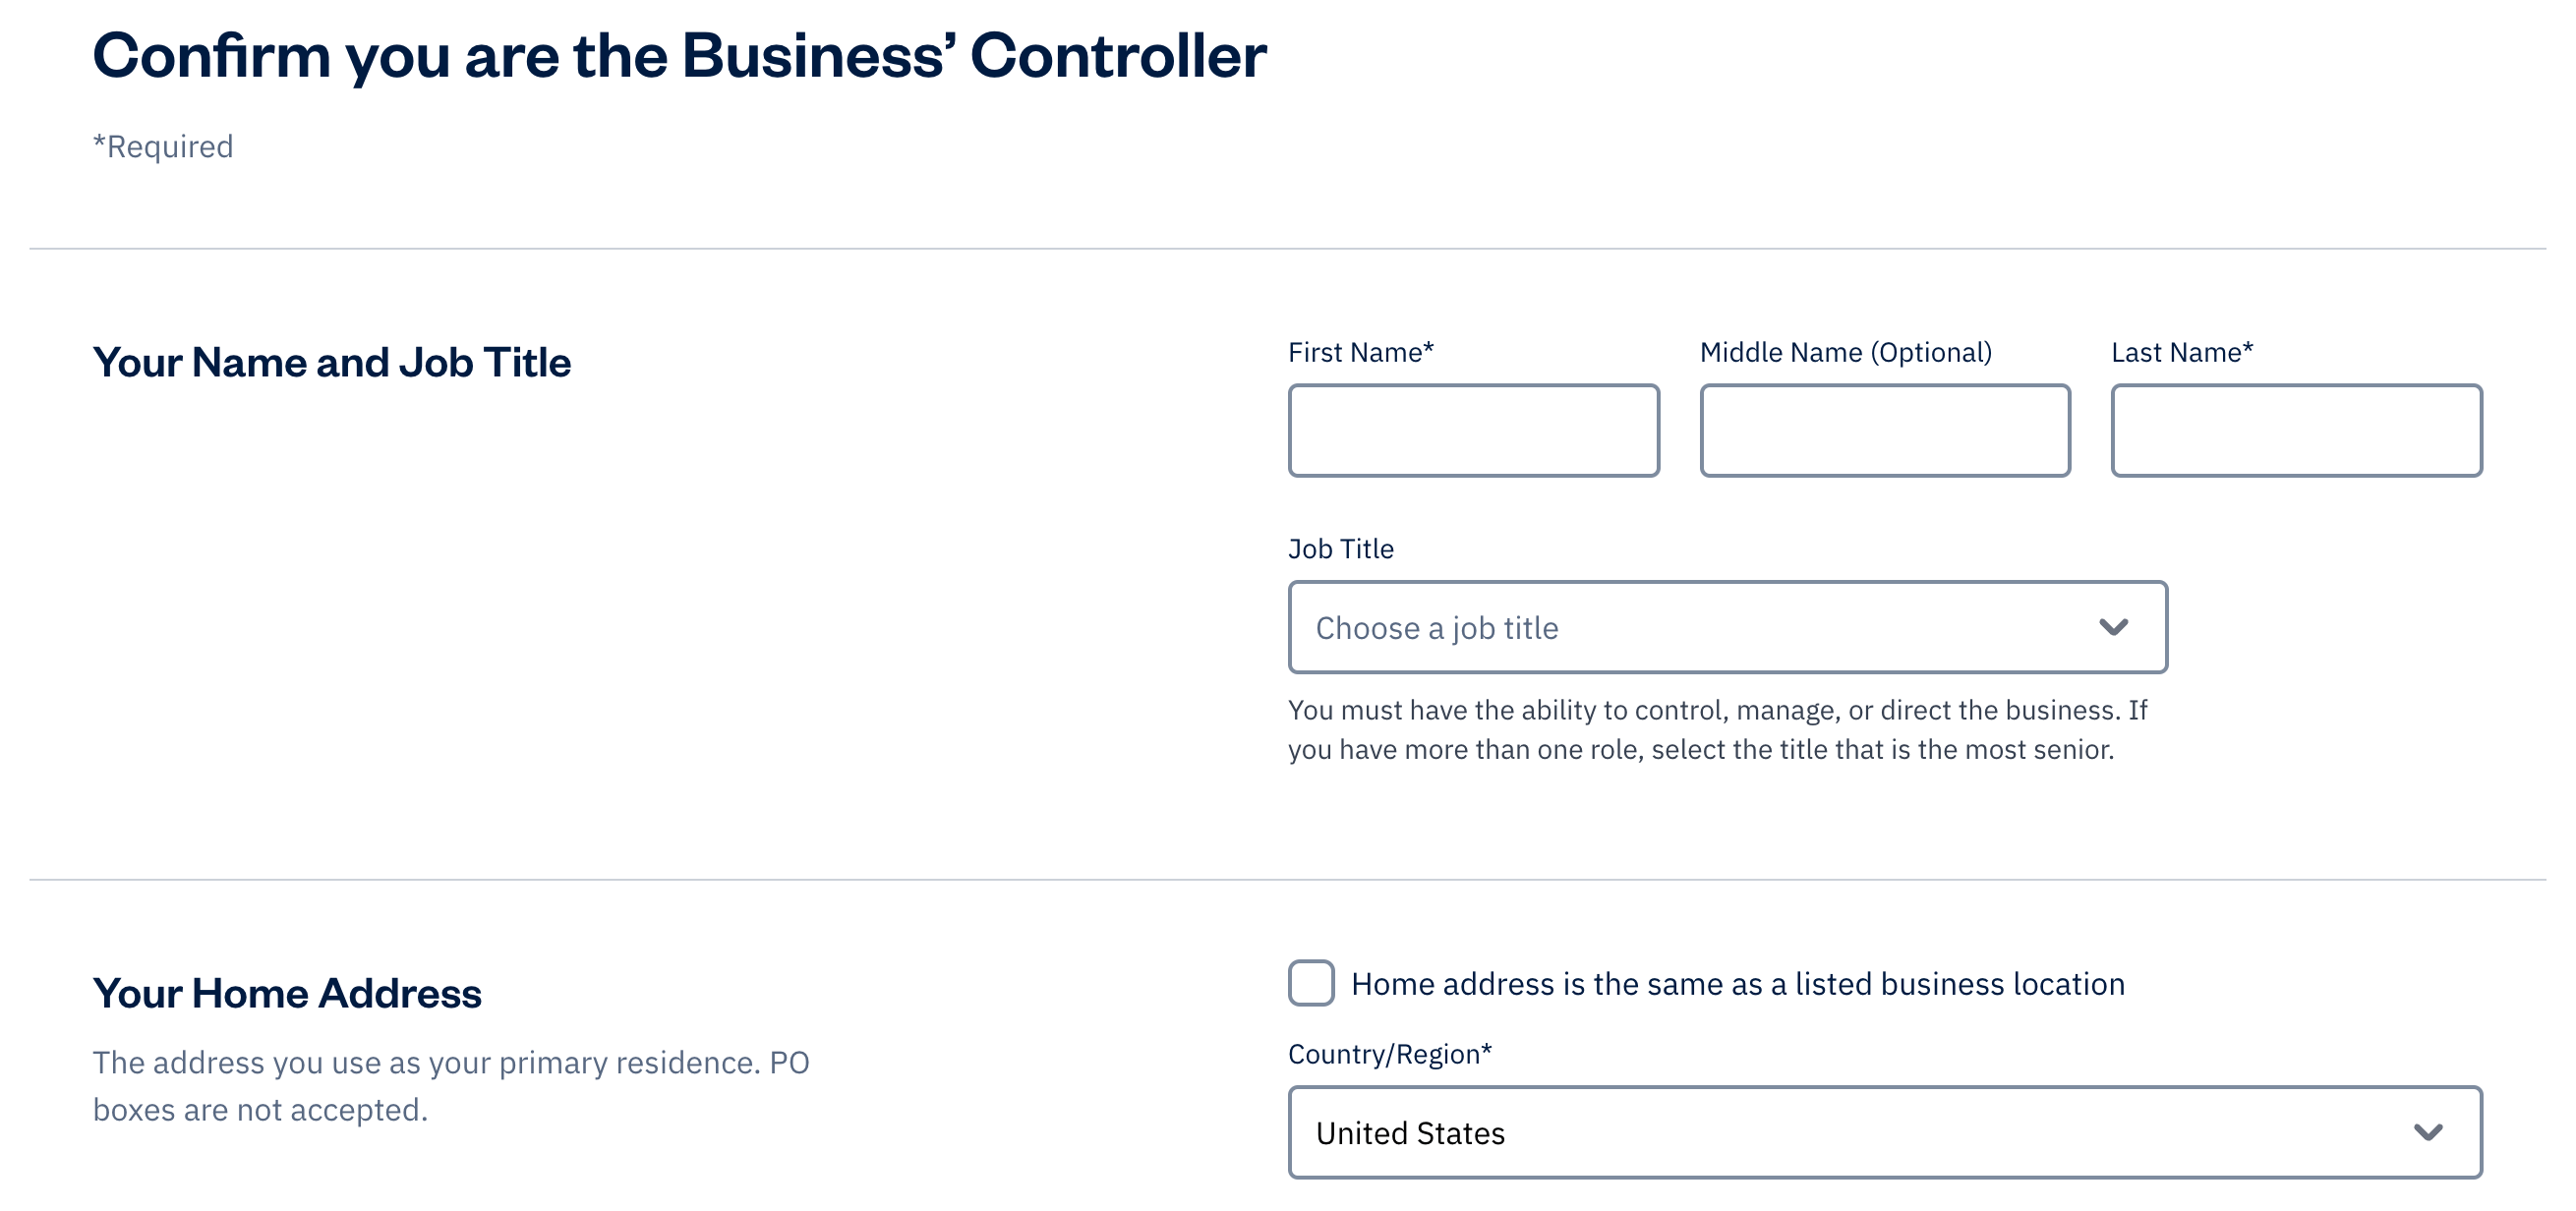 Business controller details section with fields to fill out.